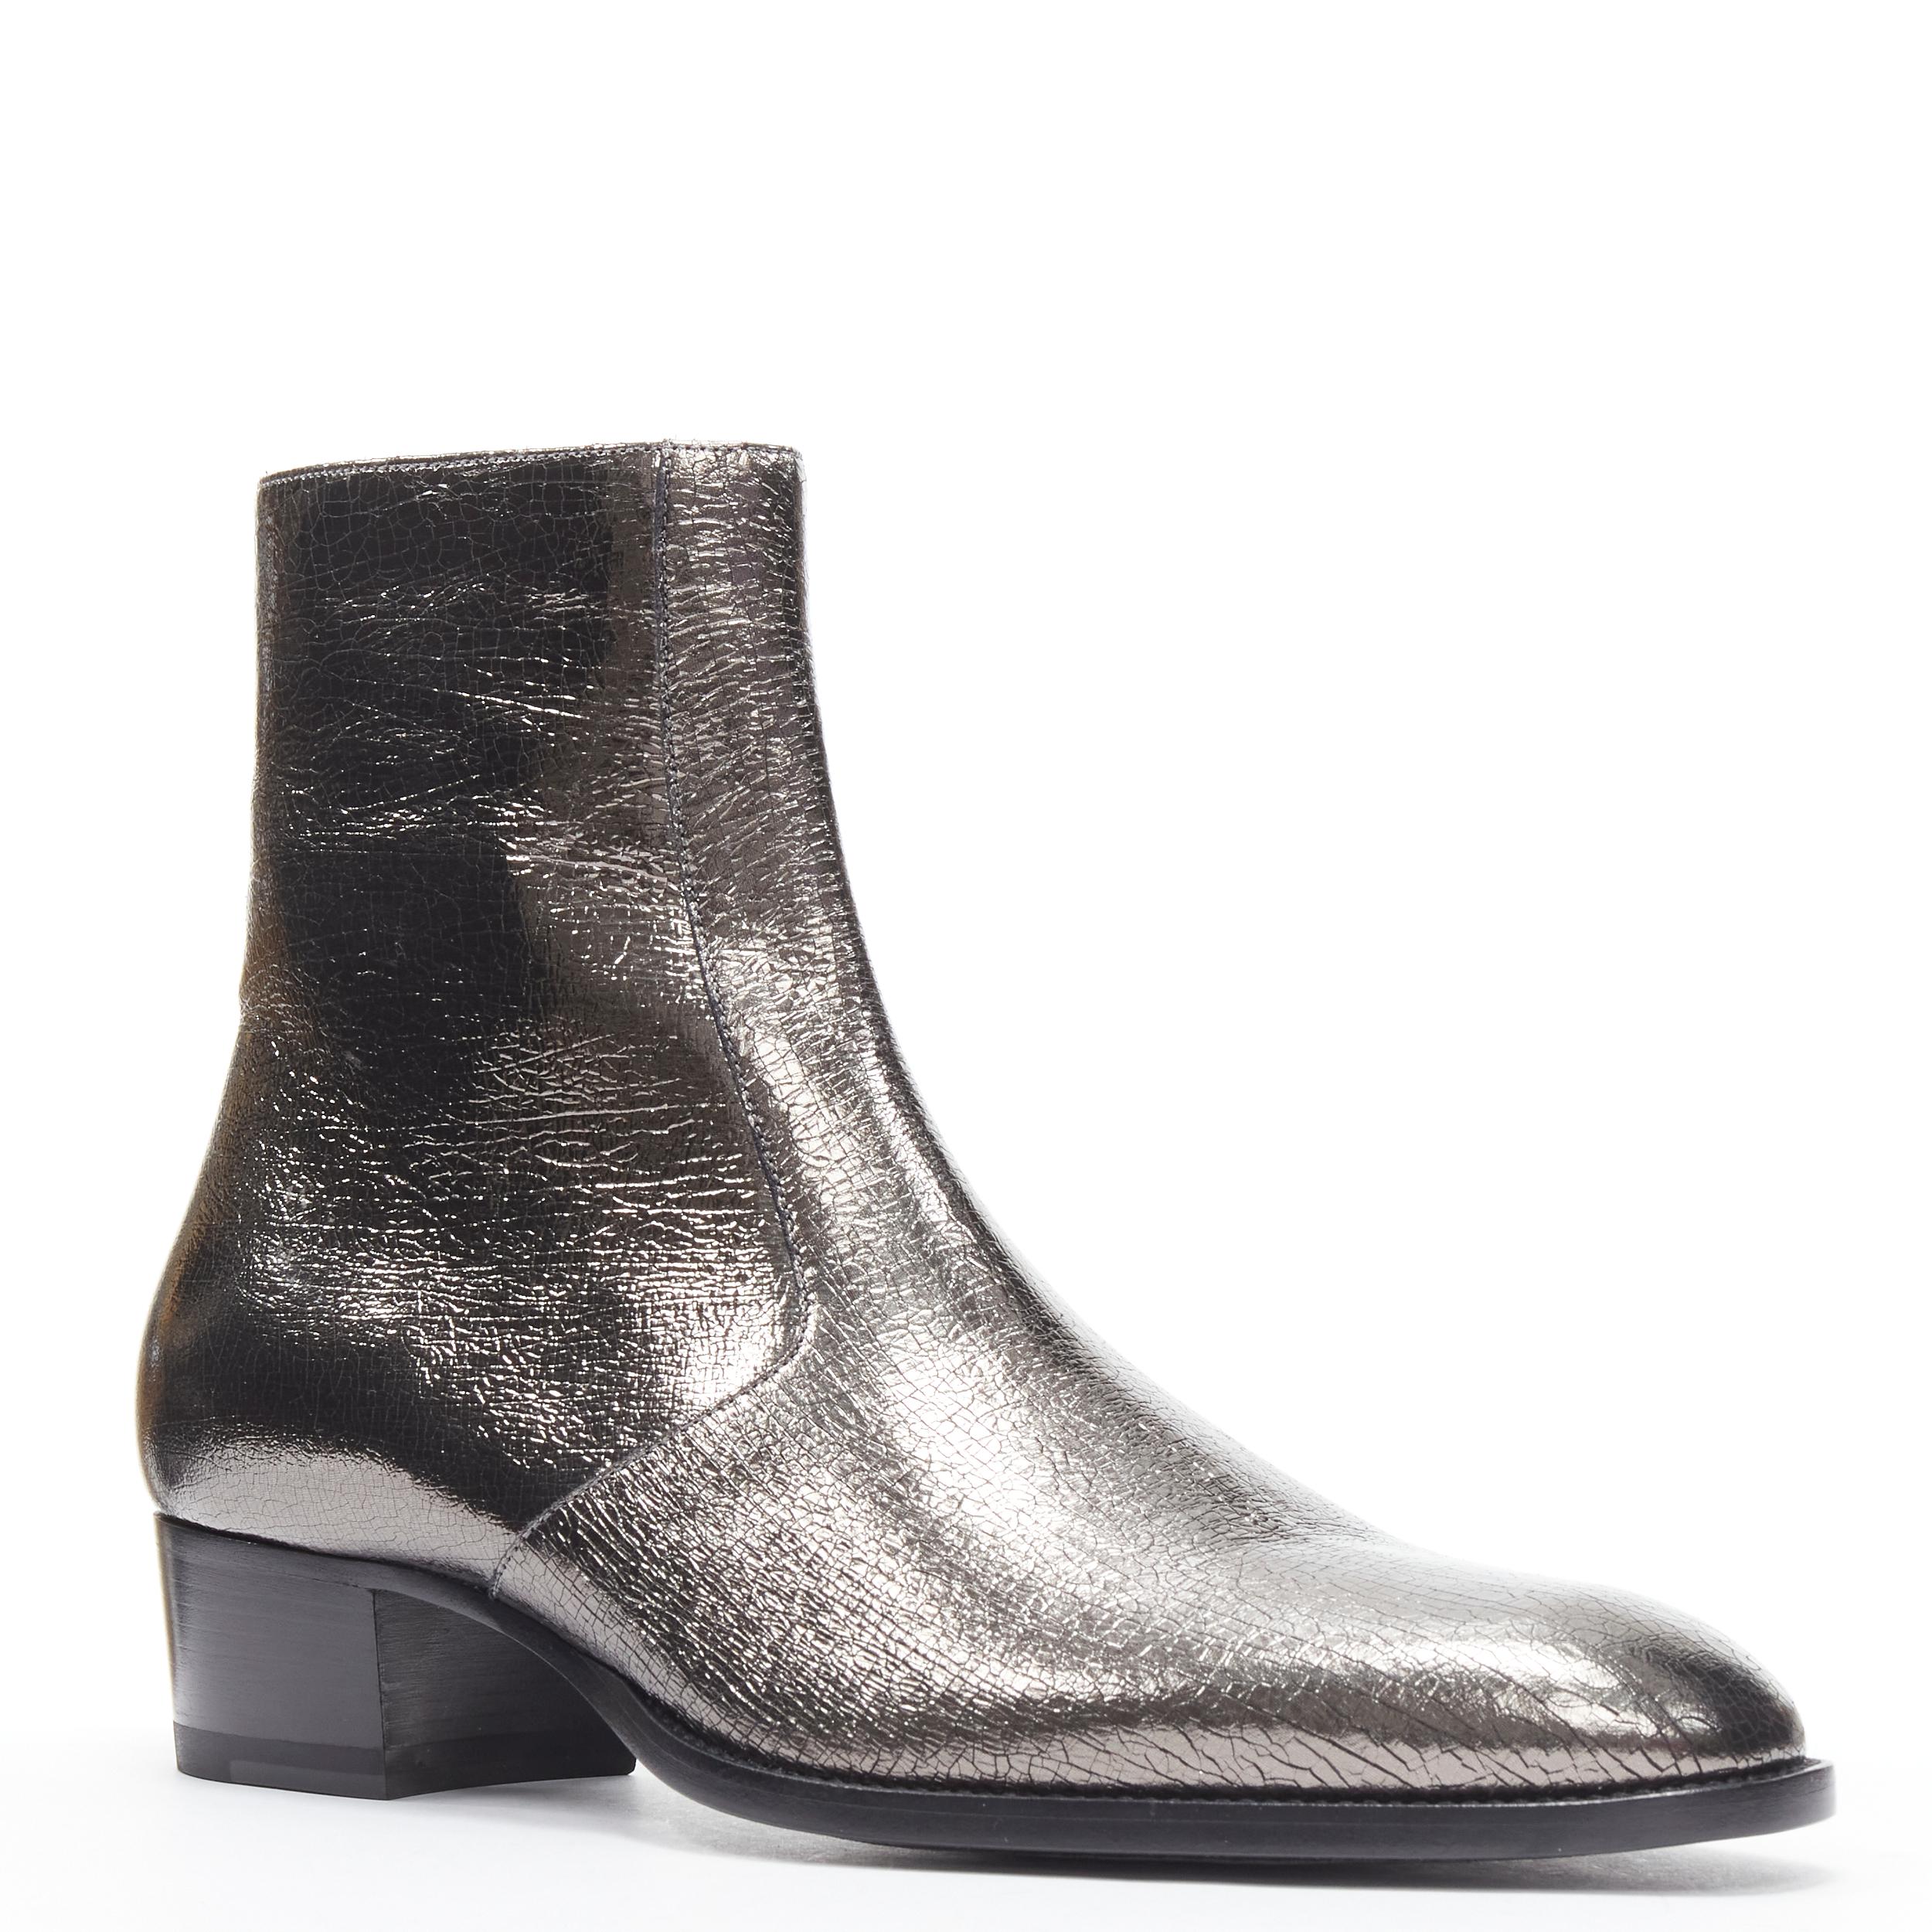 new SAINT LAURENT Wyatt 40 Zip Metal Crack Heavy gunmetal silver boot EU44 
Reference: TGAS/B01740 
Brand: Saint Laurent 
Material: Leather 
Color: Silver 
Pattern: Solid 
Closure: Zip 
Made in: Italy 

CONDITION: 
Condition: New with tags. 
Comes